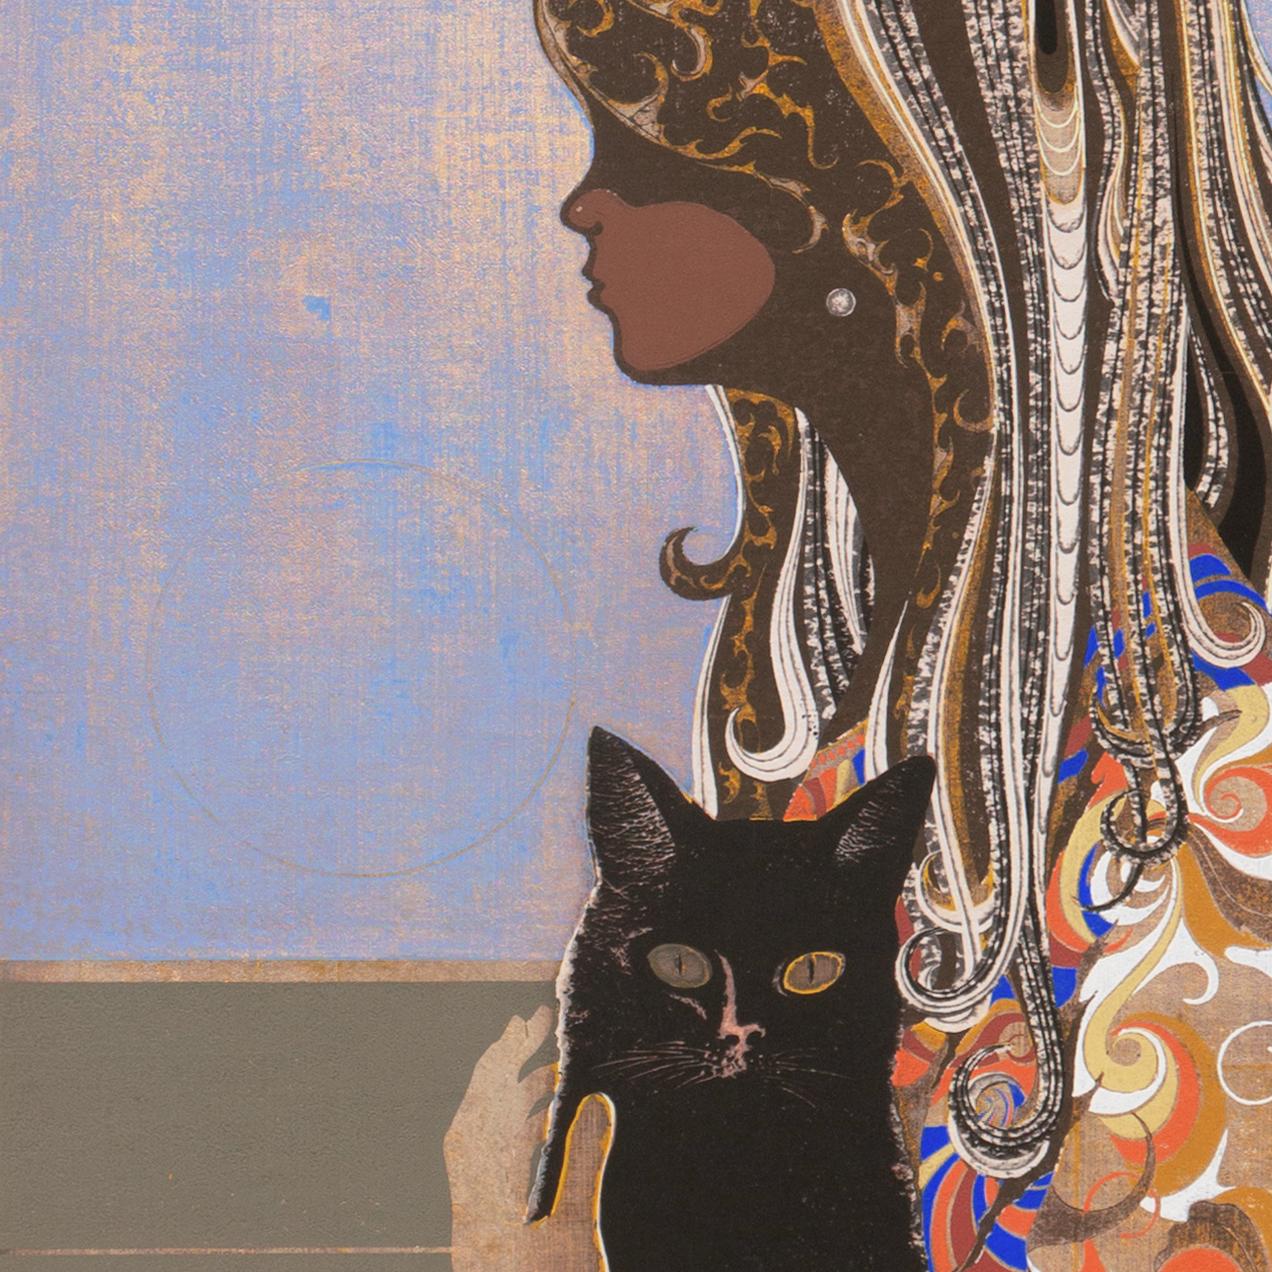 'Young Girl, Black Cat', LACMA, Psychedelic Japanese Wood-Block, Tokyo Biennale For Sale 4